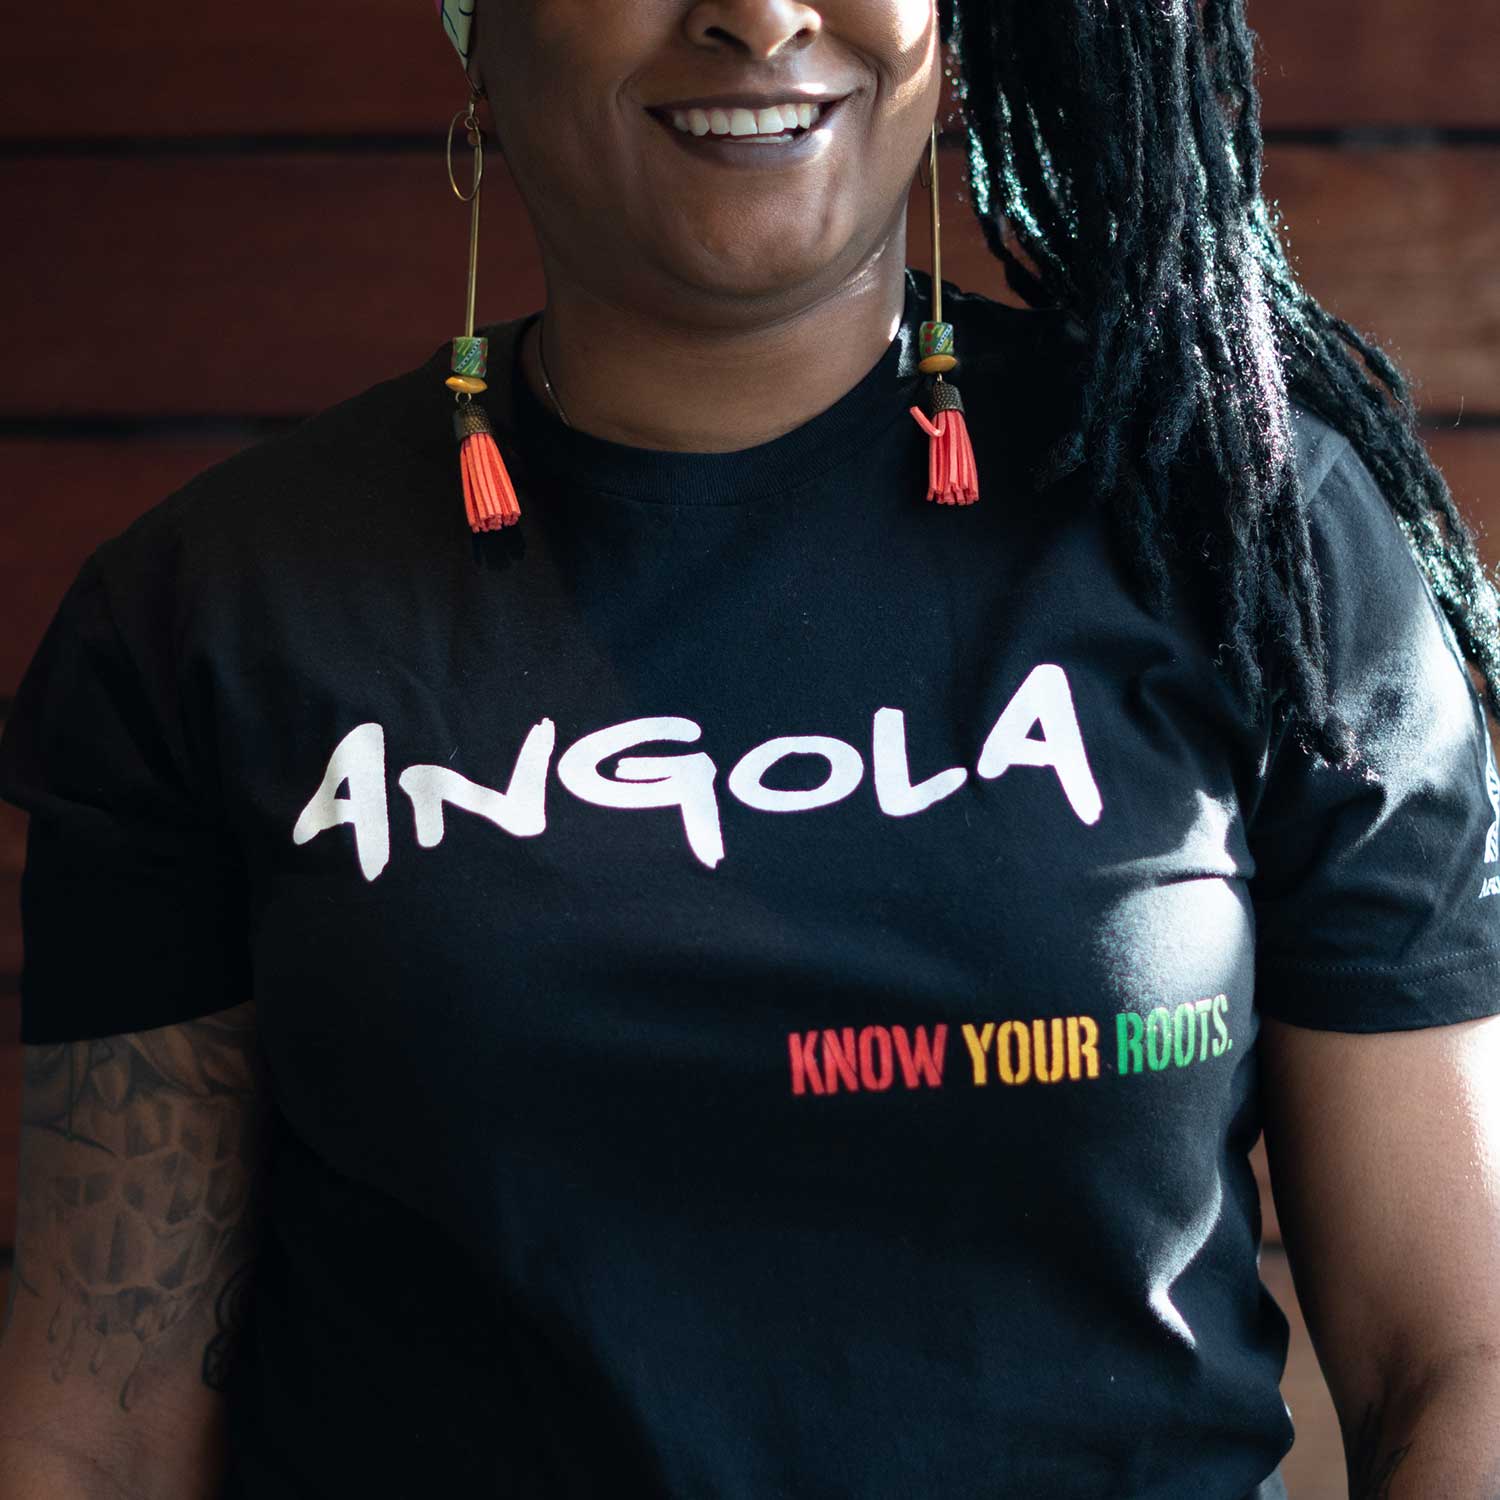 African American woman wearing the Angola T-shirt with "Angola" written in white and "Know Your Roots" written in African colors 